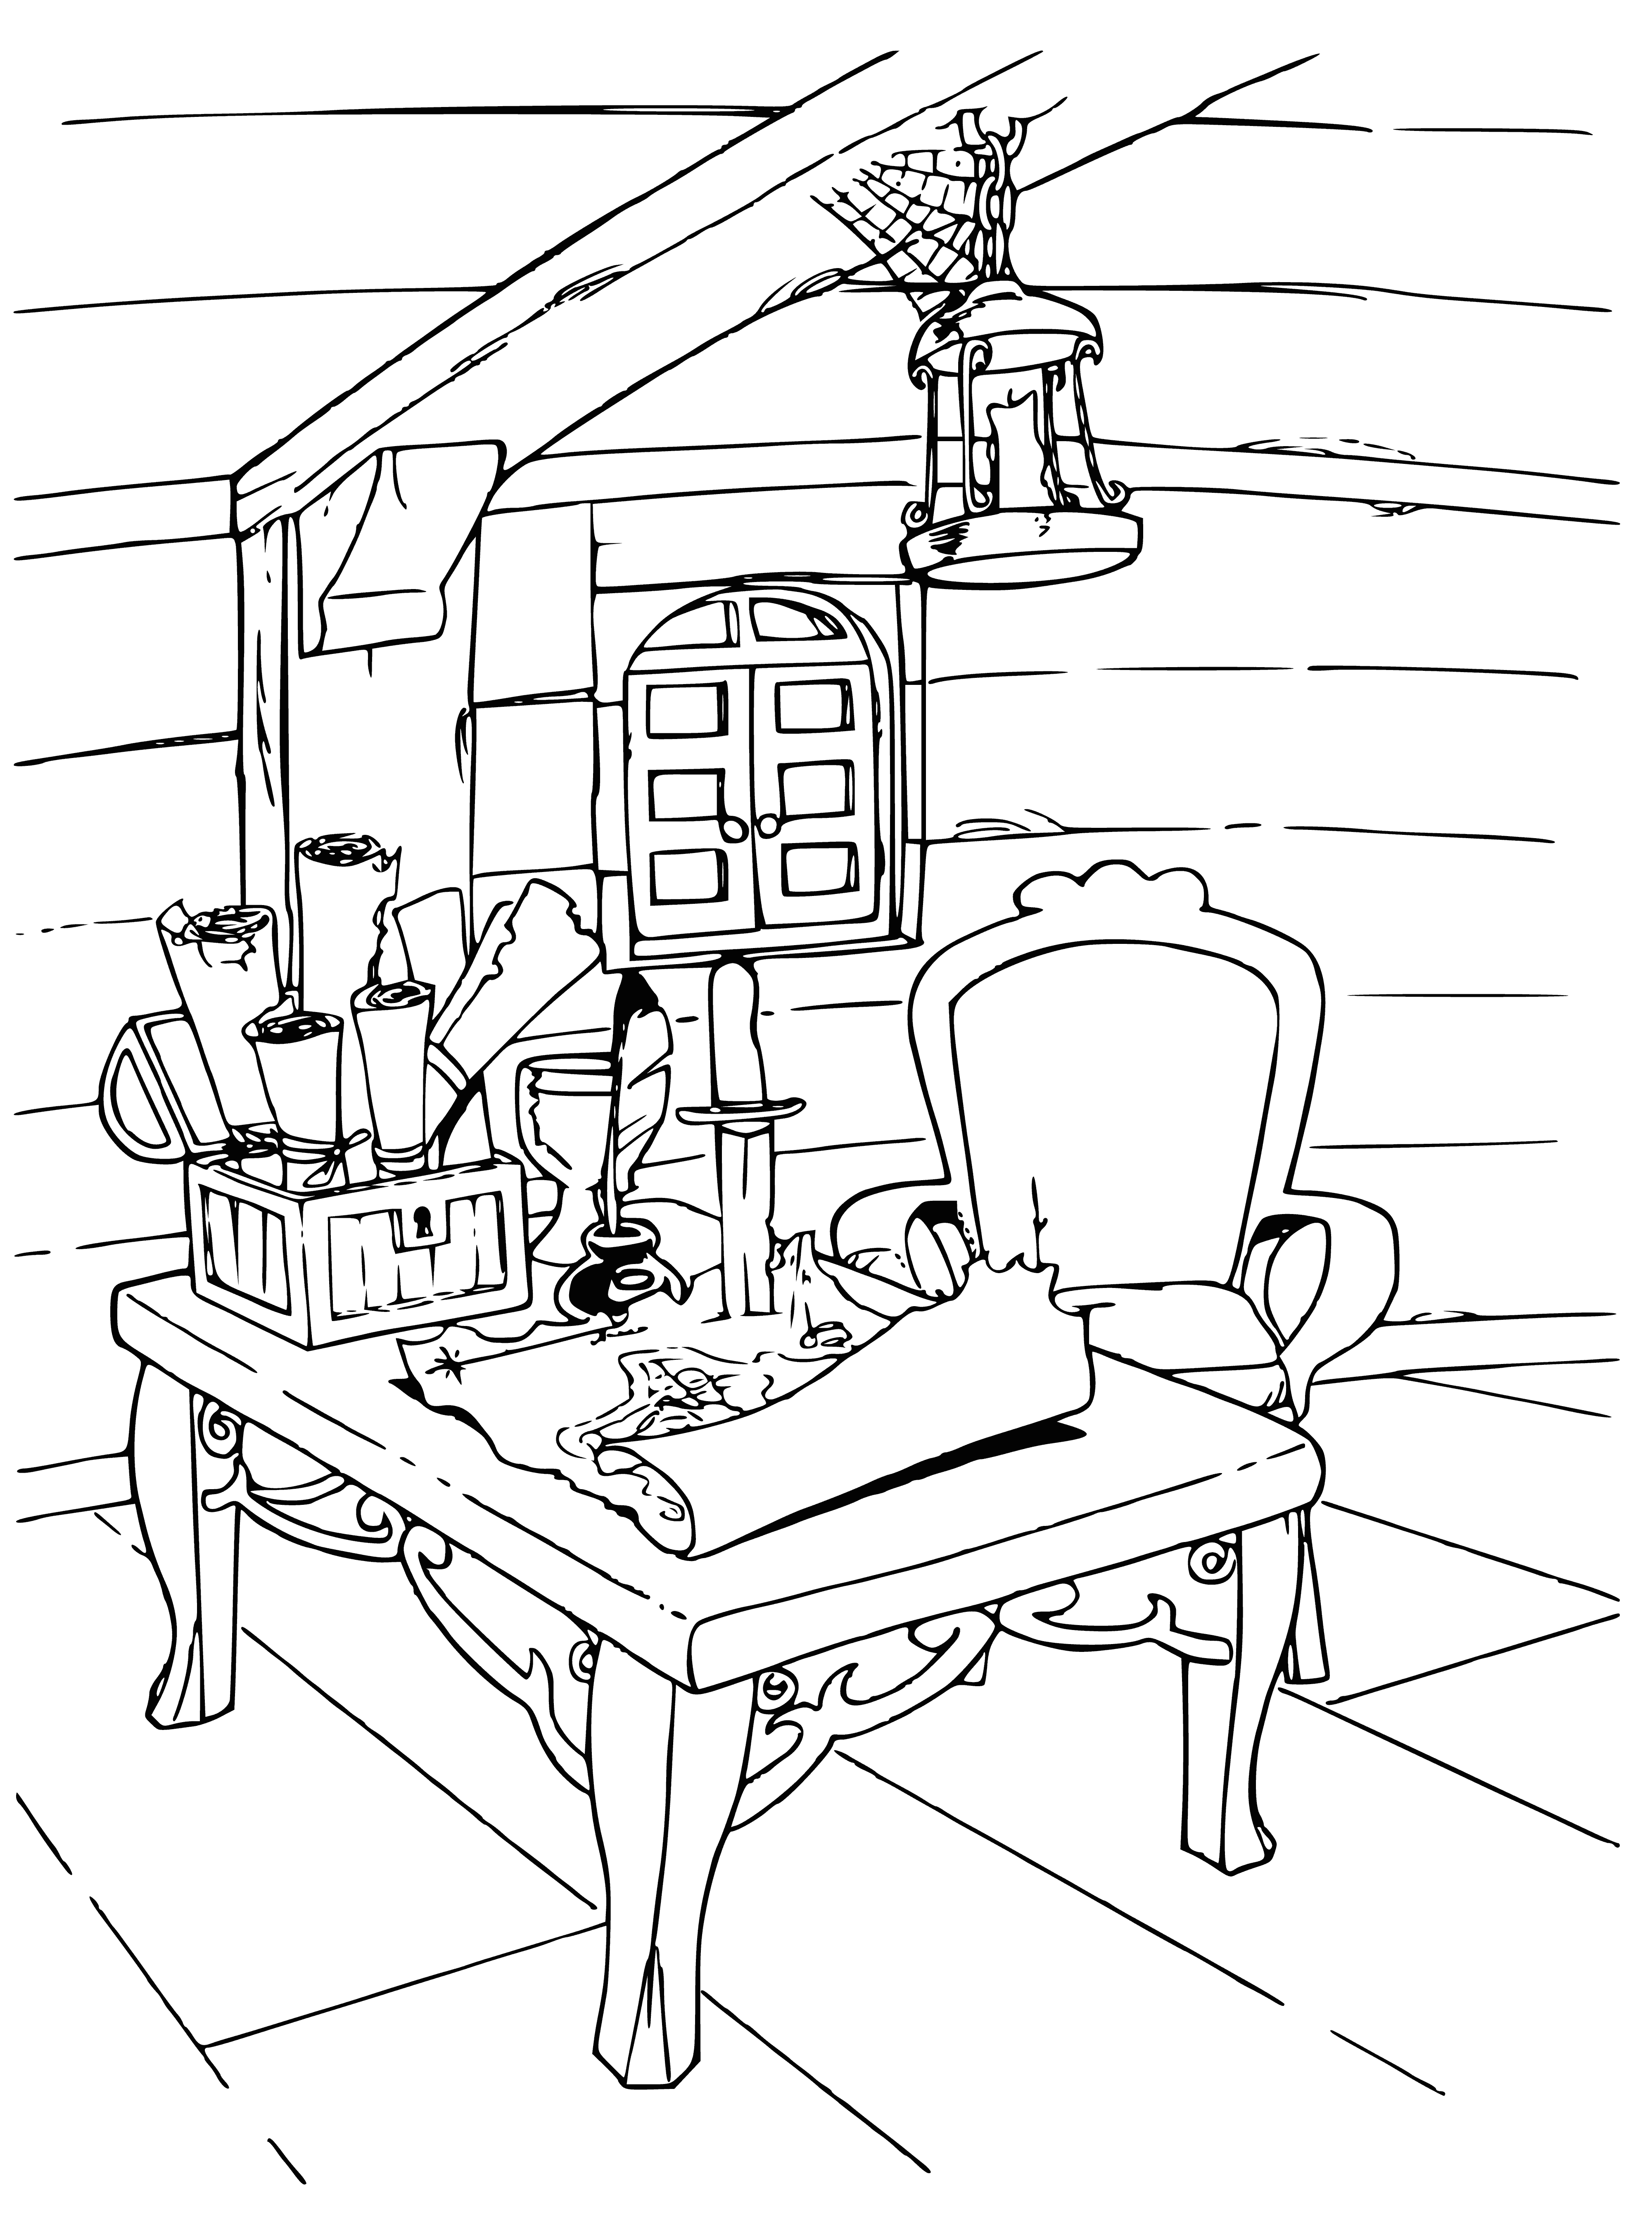 Captain;s cabin coloring page